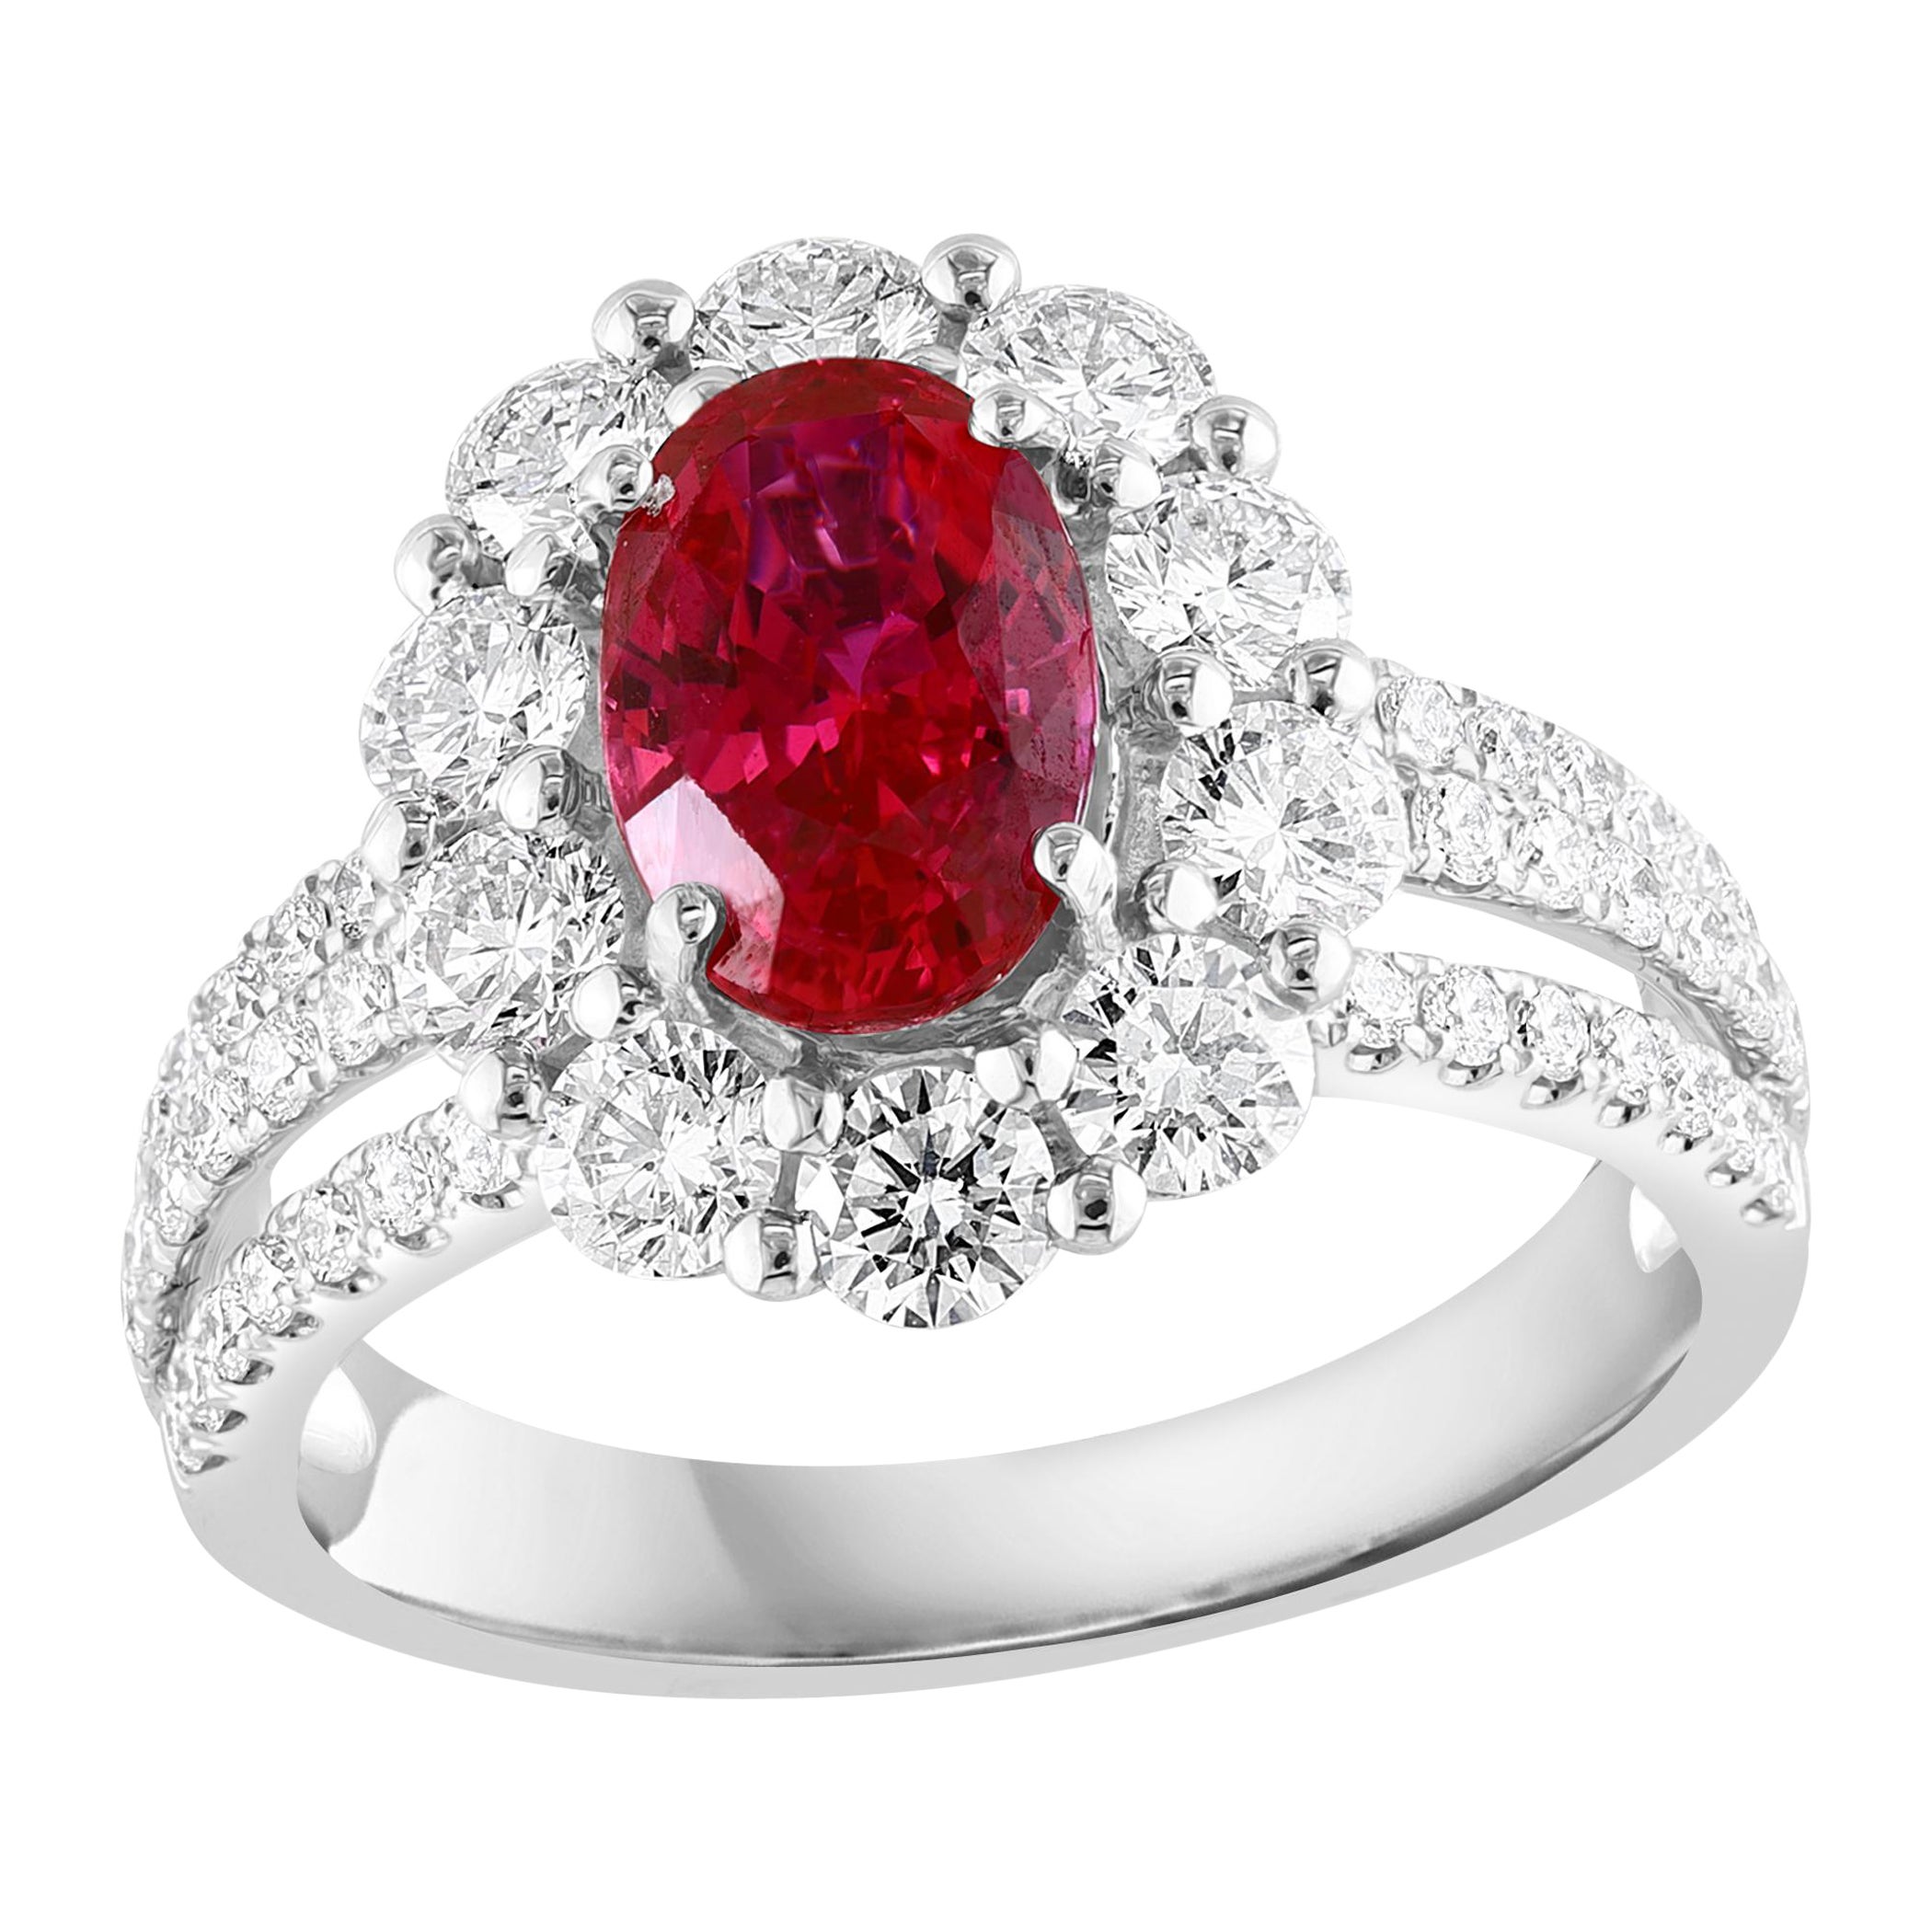 2.05 Carat Oval Cut Natural Ruby and Diamond Engagement Ring in 18K White Gold For Sale